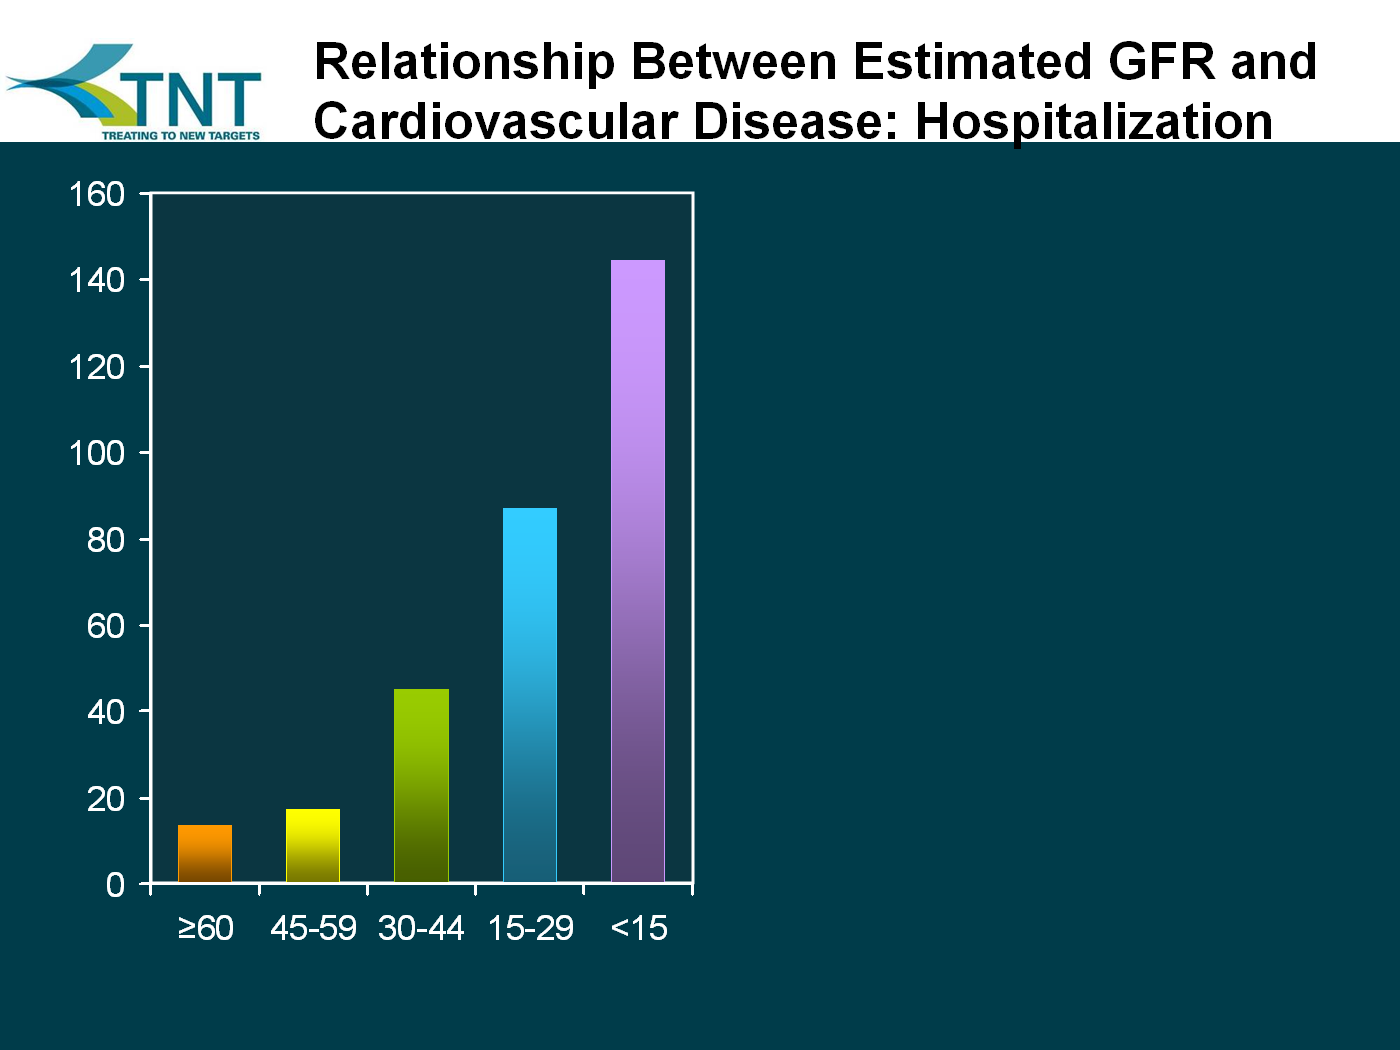 CKD Subgroup Relationship Between Estimated GFR (egfr) and Clinical Outcomes Age-standardized event rate (per 100 person-yr) Death from any cause Cardiovascular events Any hospitalization Total